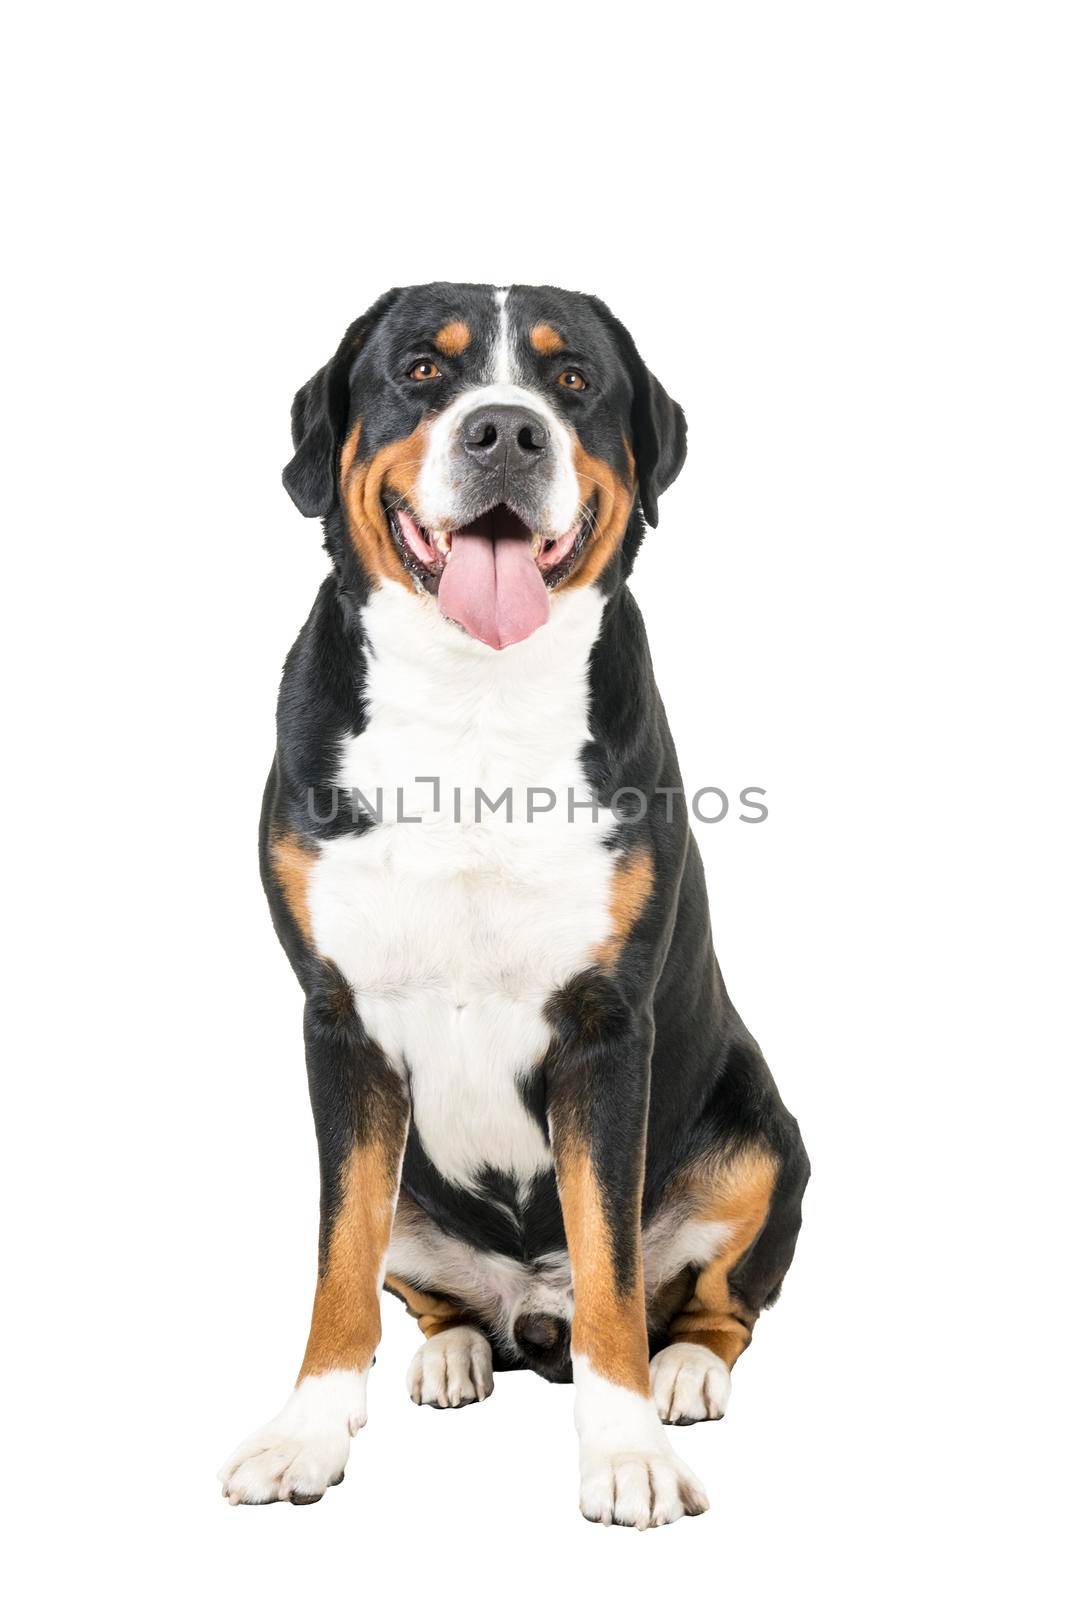 Greater Swiss Mountain Dog sitting and looking into the camera by LeoniekvanderVliet